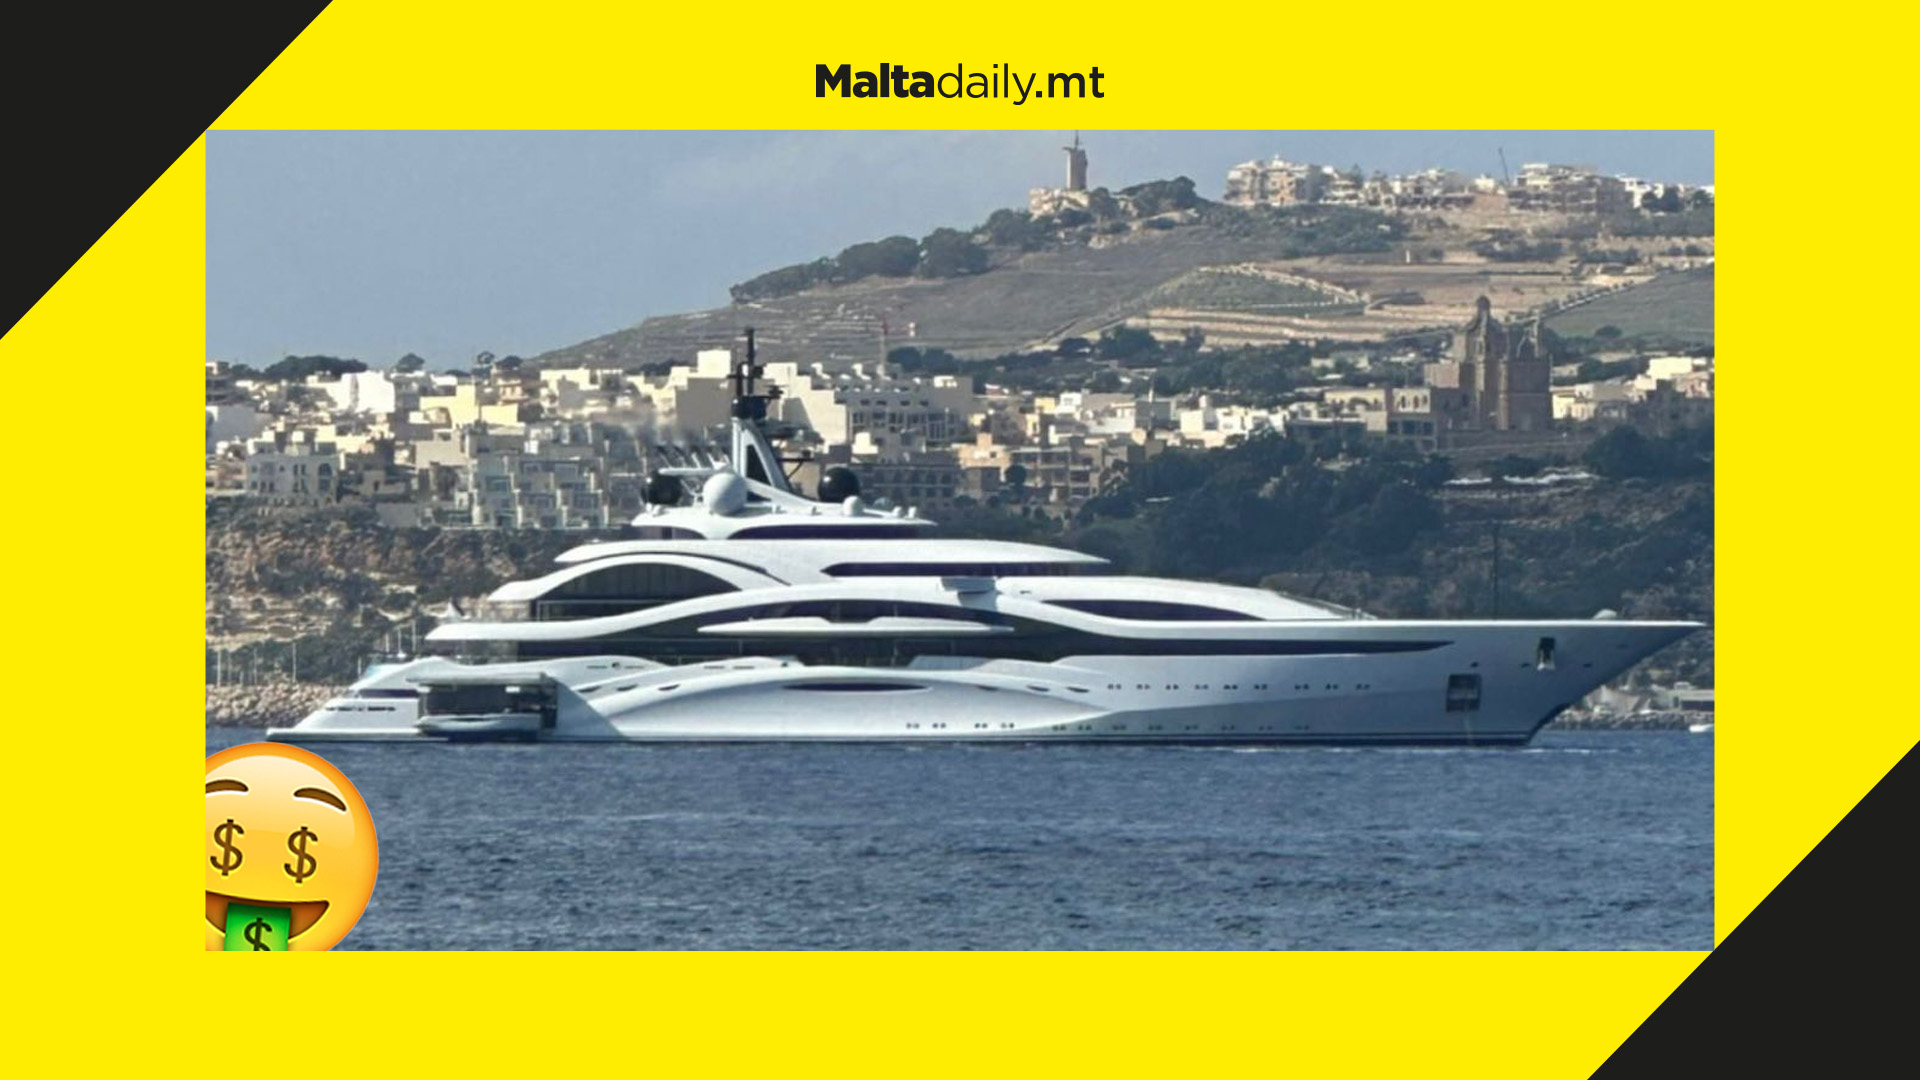 One of the world's most luxurious superyachts, with $500 million price tag, spotted in Malta